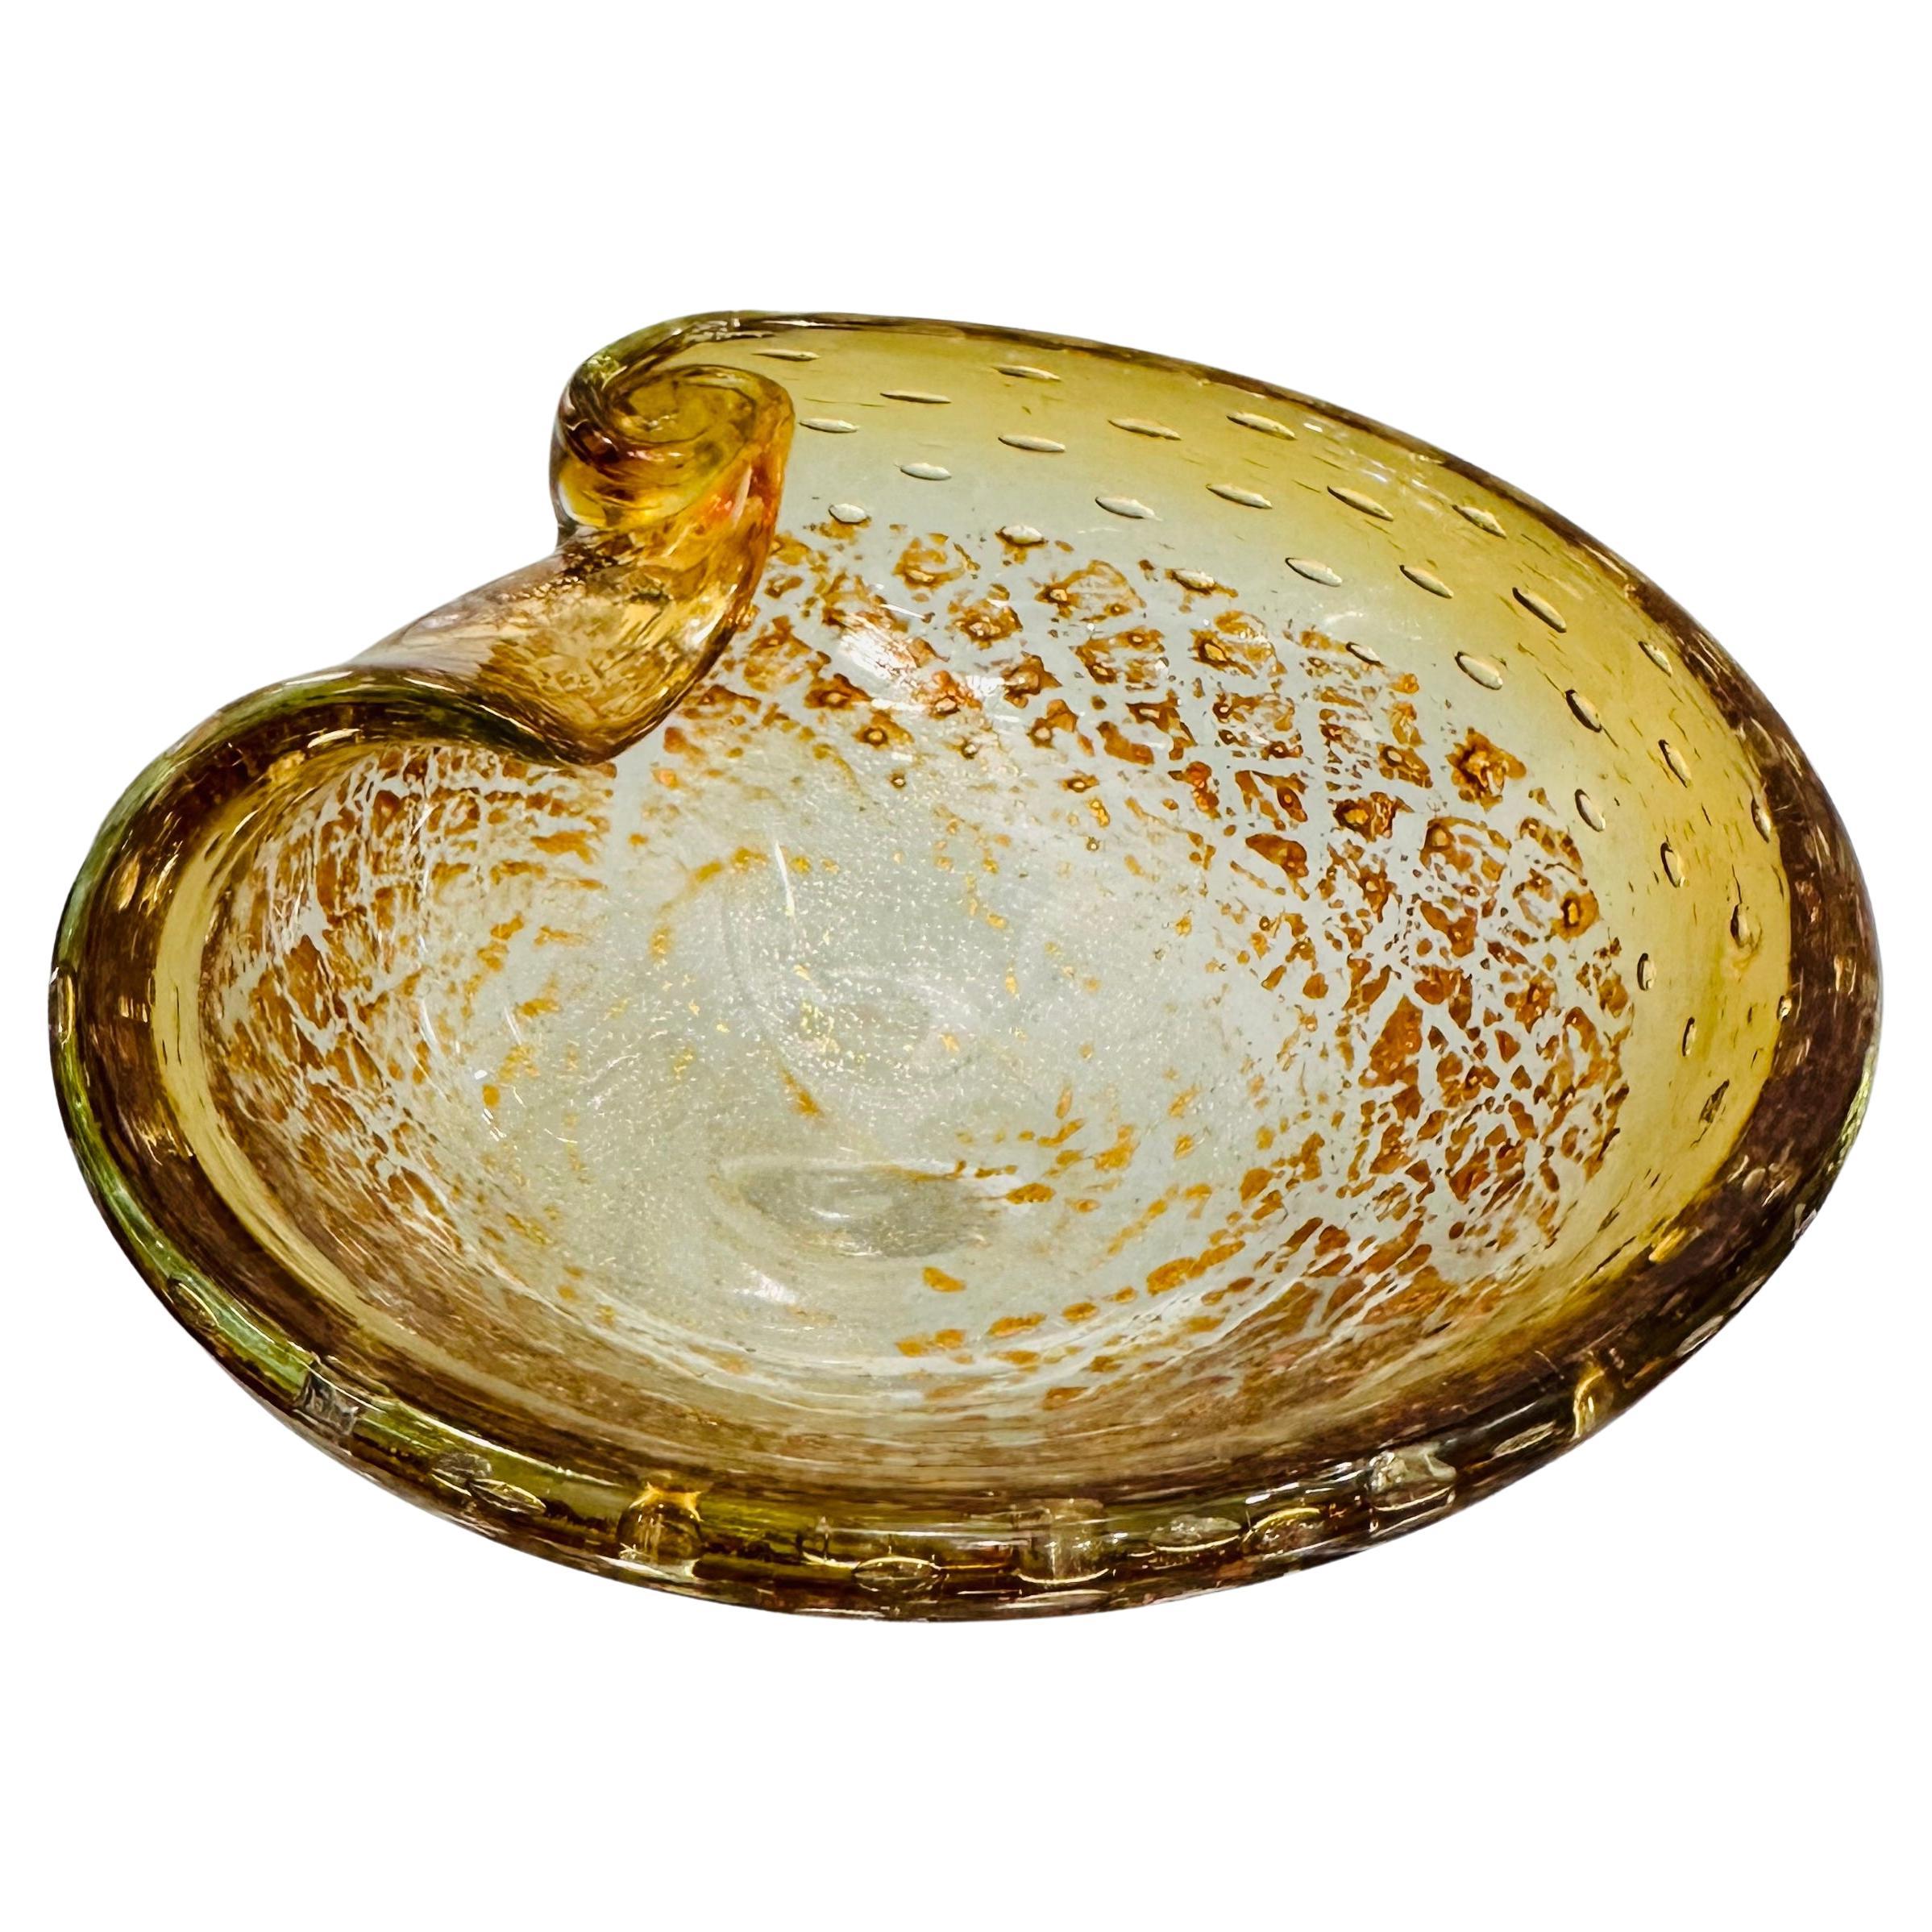 1960s Italian Murano Golden Inclusion Clear Glass Bowl, Candy Dish or Ashtray For Sale